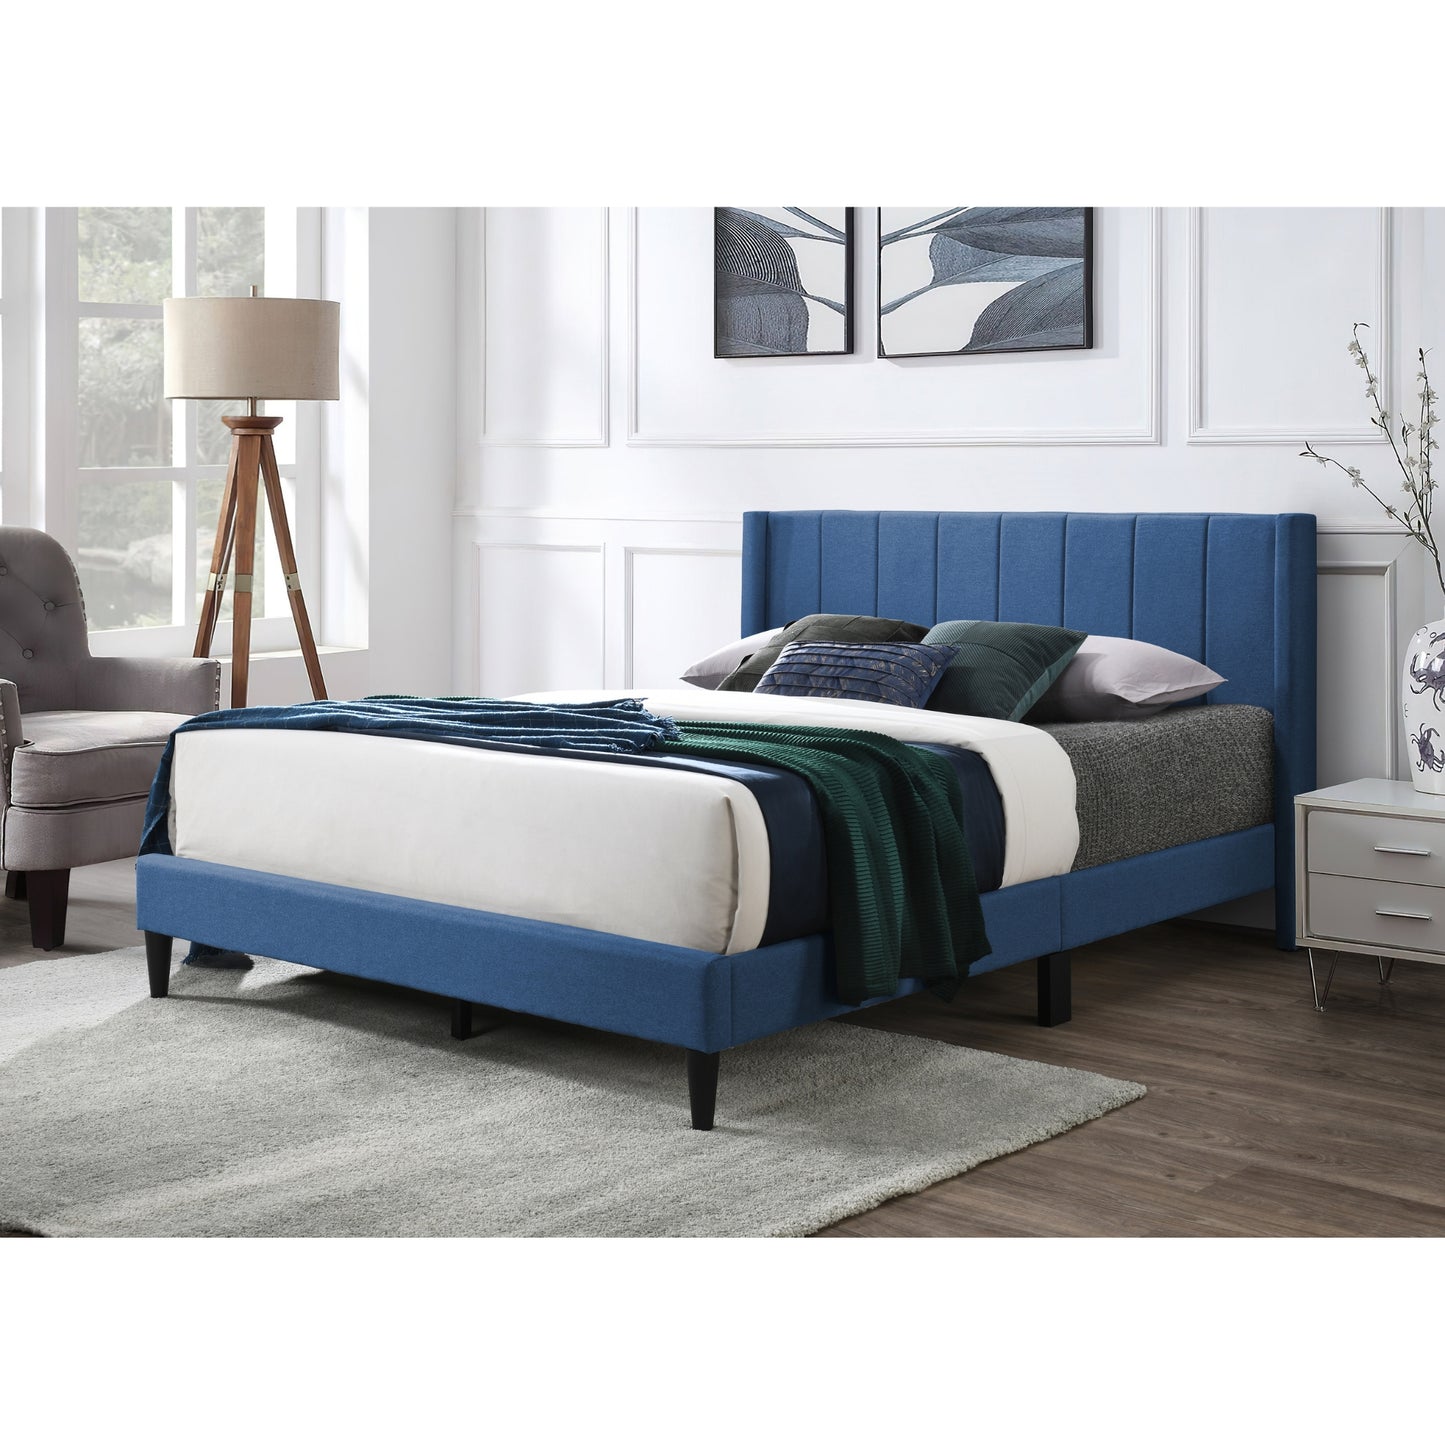 Samson Double Bed Winged Headboard Fabric Upholstered - Blue